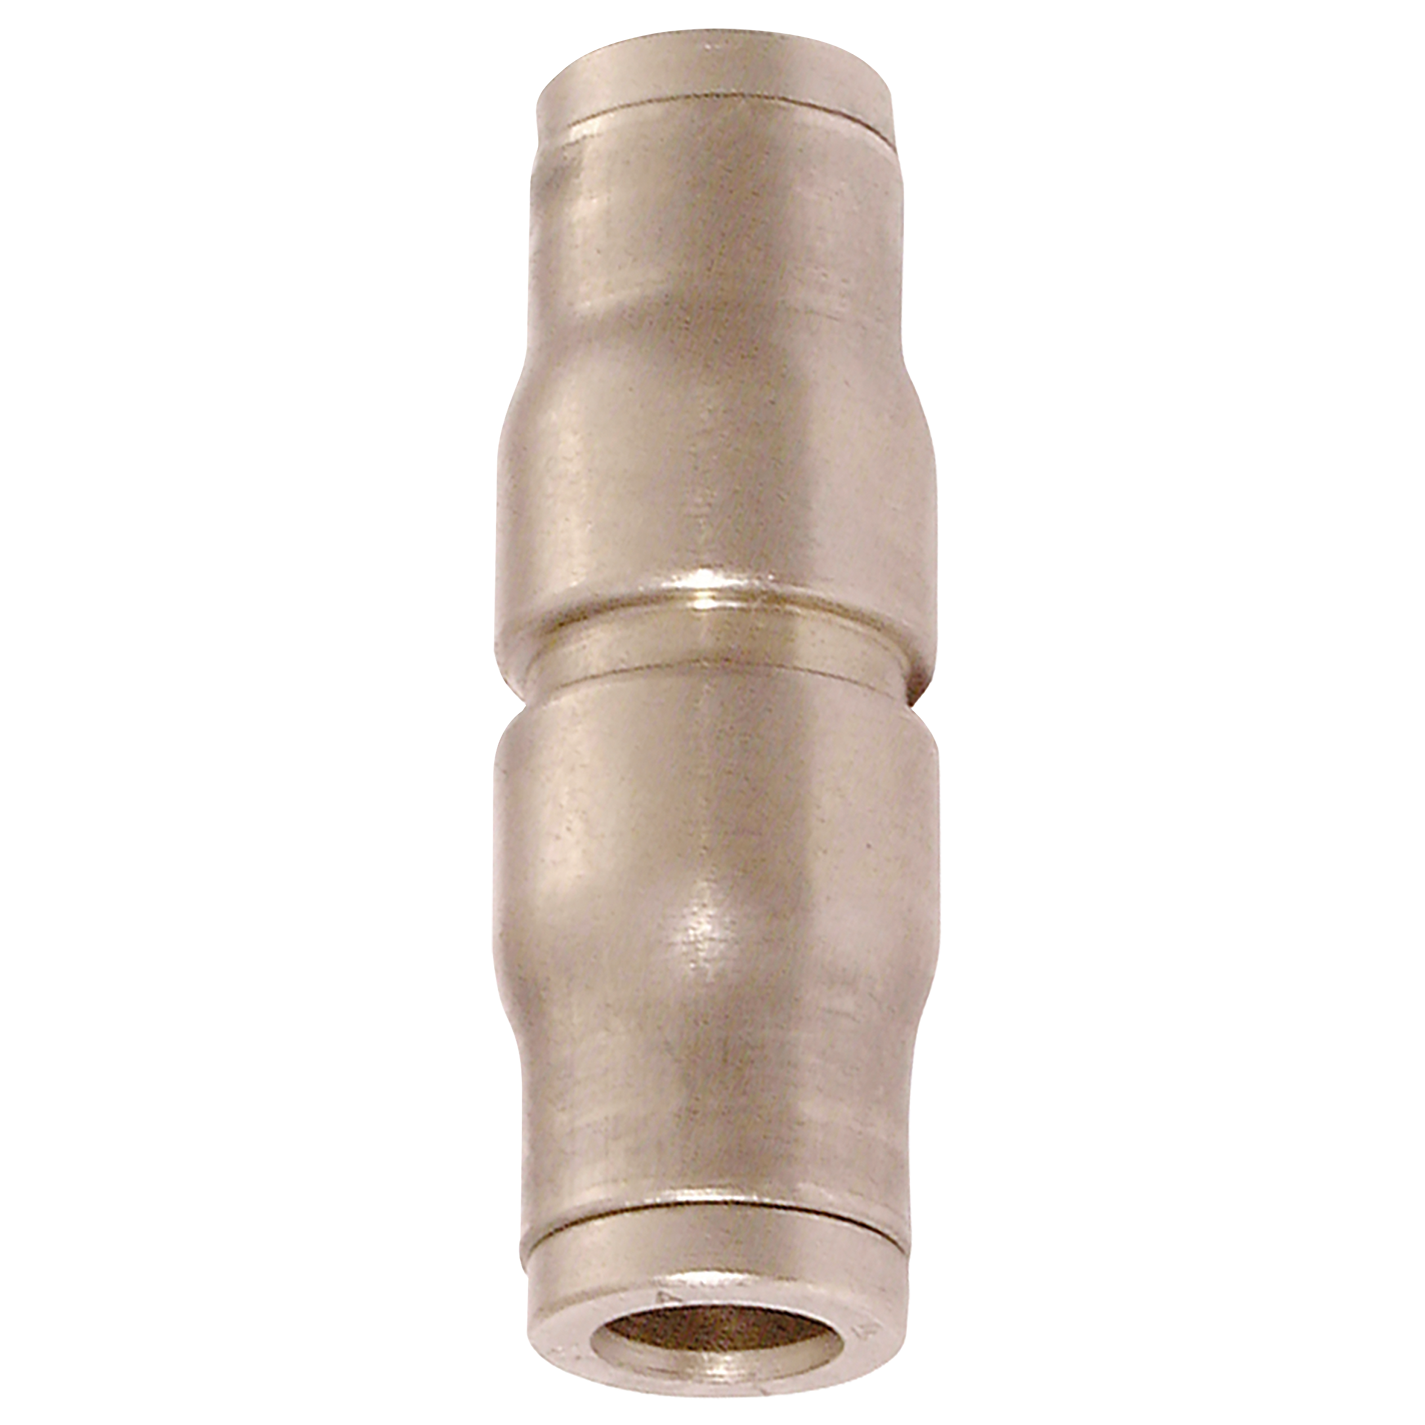 4MM EQUAL TUBE TO TUBE CONNECTOR